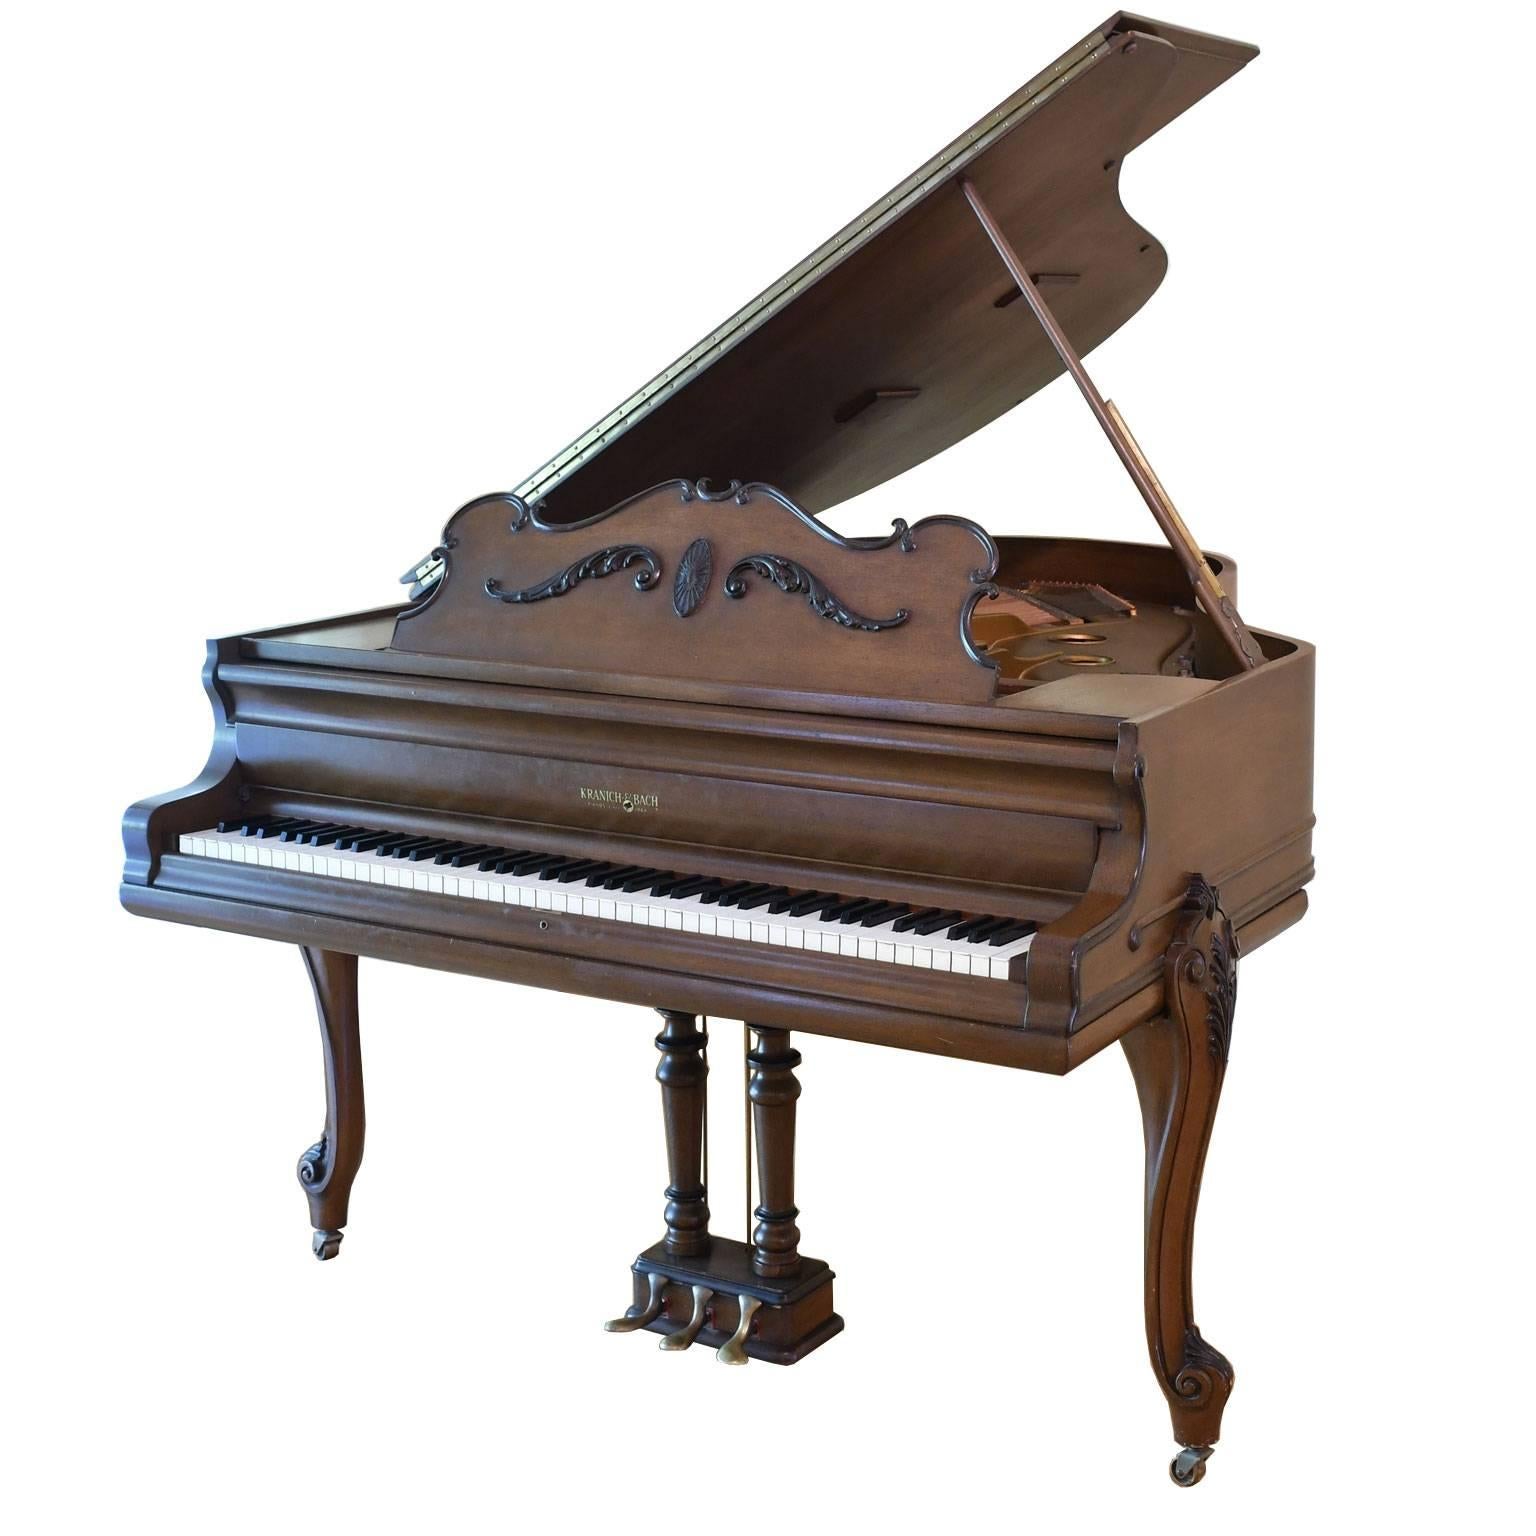 Most likely made in the Rochester, New York, factory in 1903, this fine petite baby grand piano is in excellent playing condition. The case is in the French Louis XV style with carved cabriole legs and is in a medium-colored semi-gloss walnut. There